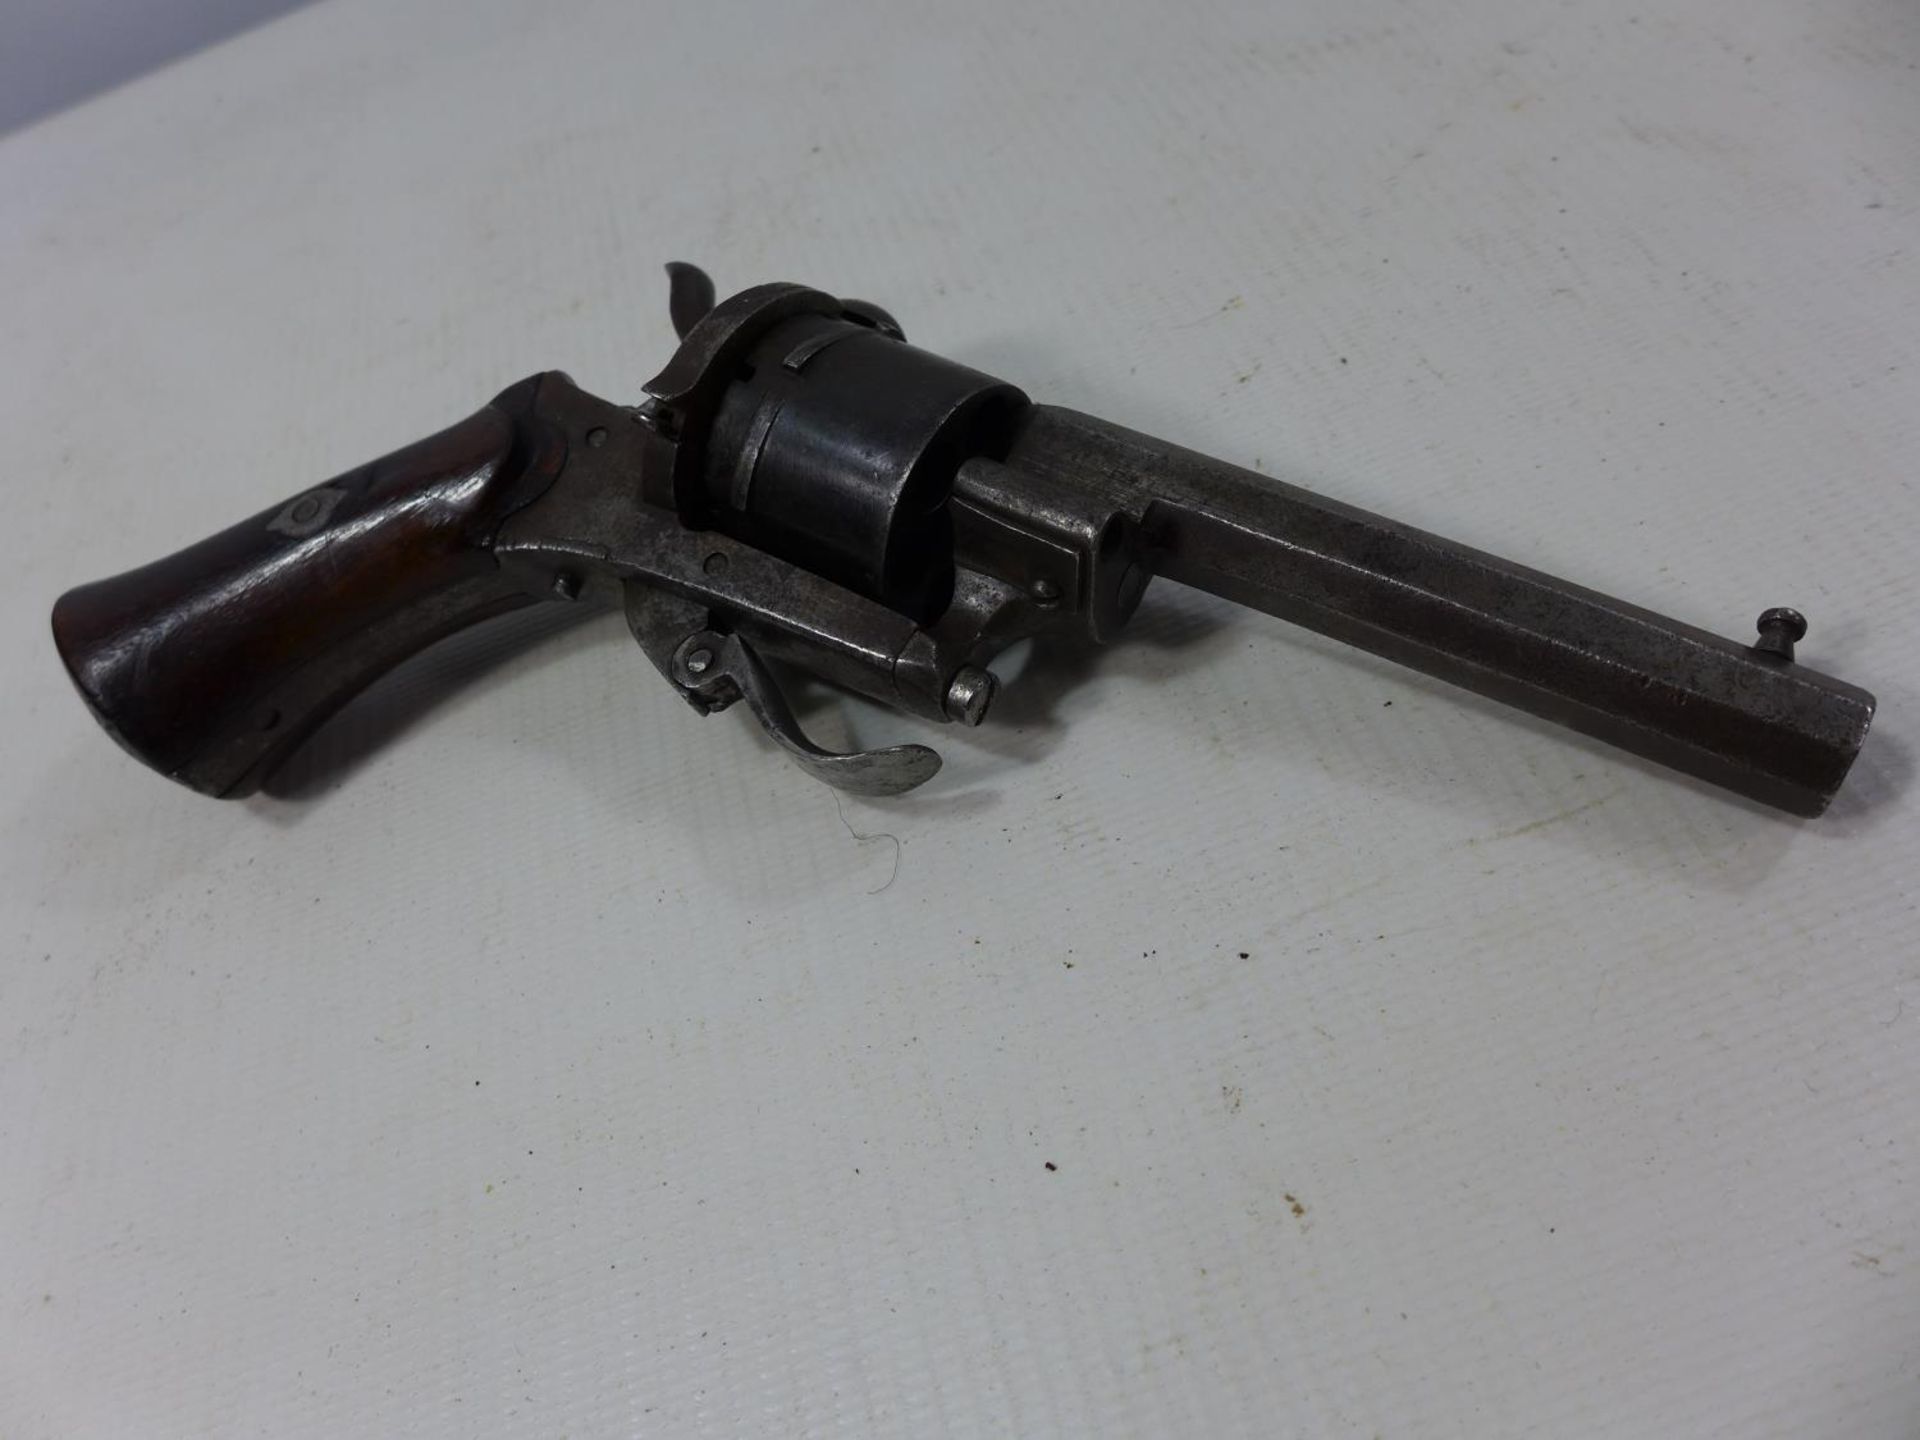 A 7.65 CALIBRE SIX SHOT PINFIRE REVOLVER WITH LIEGE PROOF MARKS, HAMMER SPRING FAULTY - Image 2 of 3